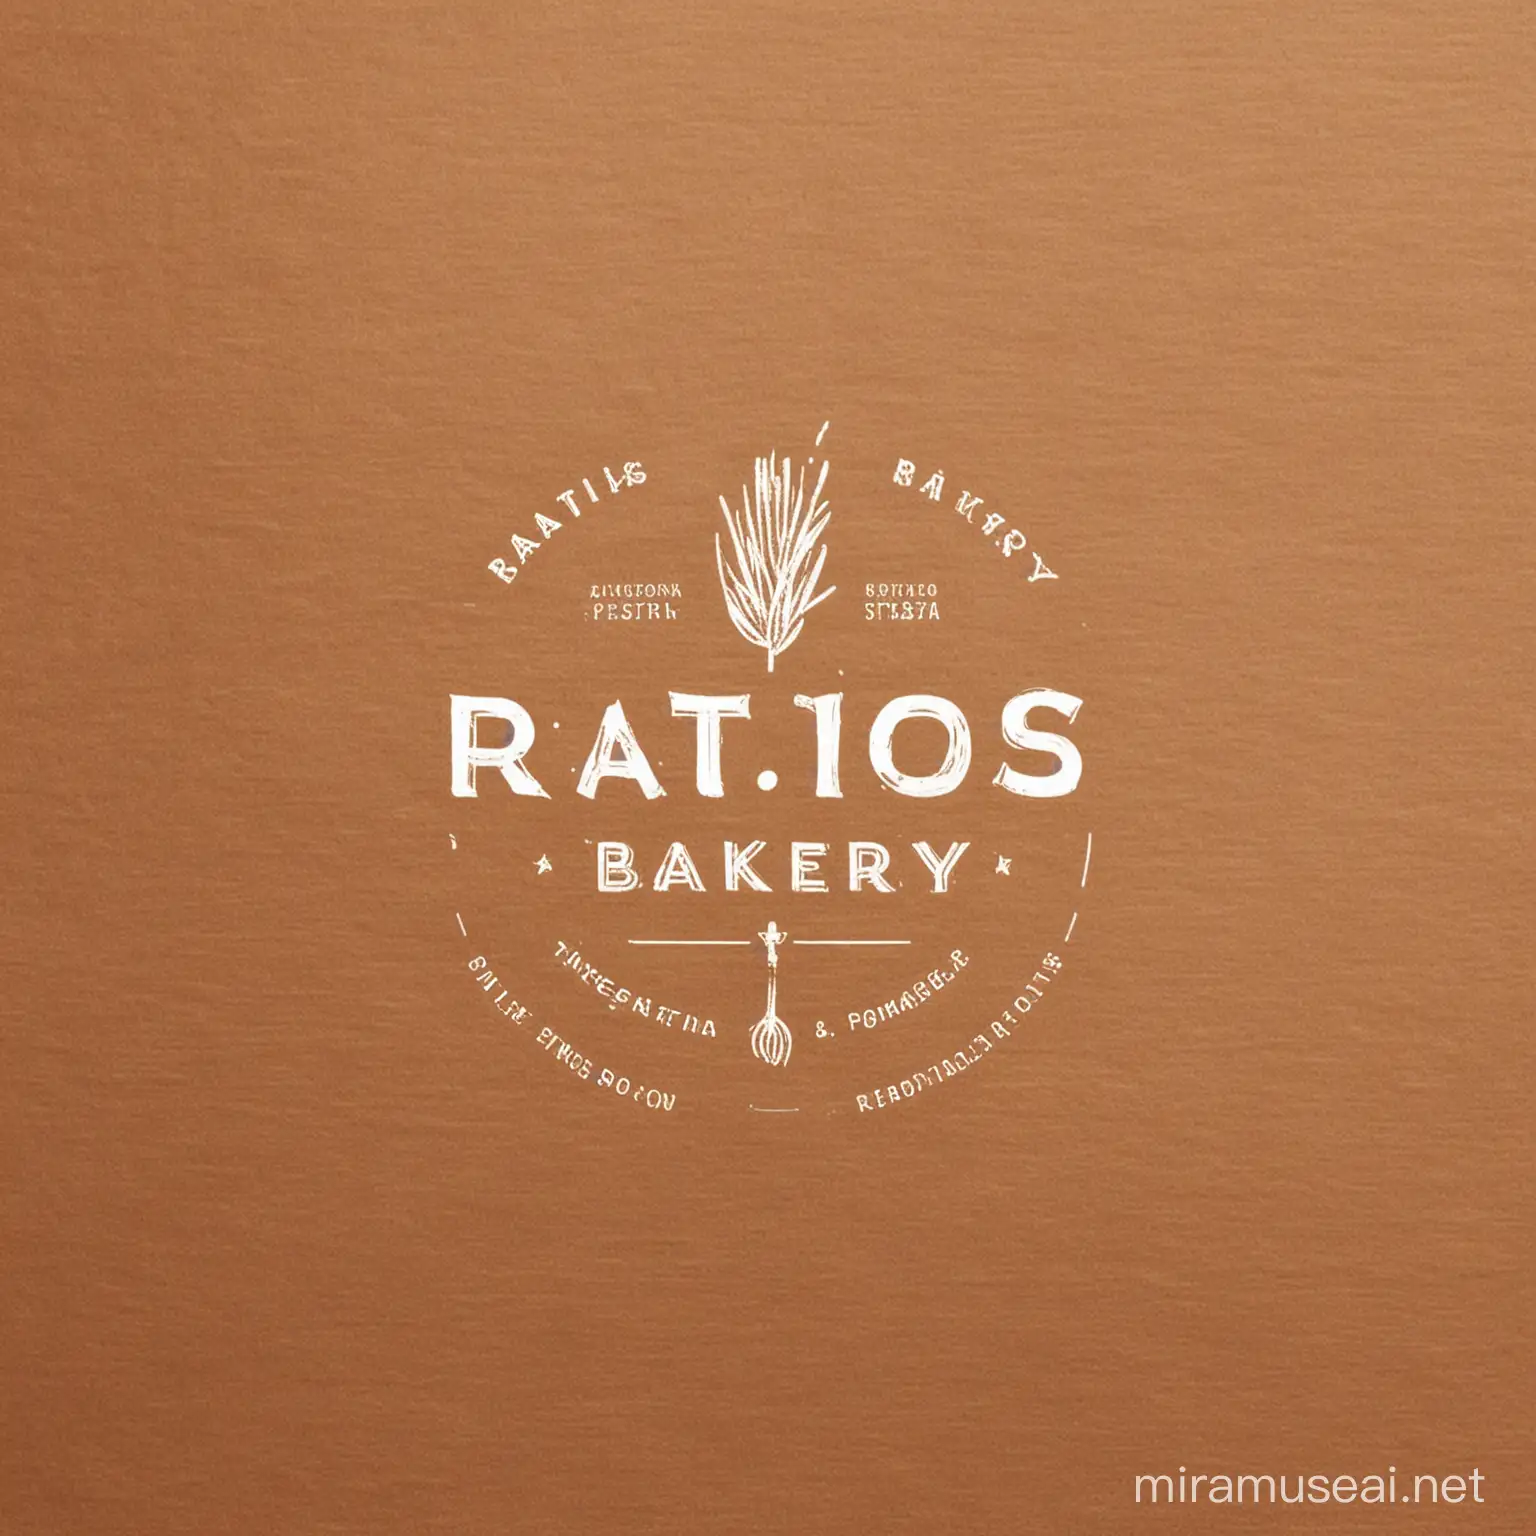 logo for Ratios bakery/resturant that demonstrate the identity of the brand which is using simple ratio between three ingrediants to make all the products fresh and from scratch. the logo is simple with colors of browns including some simple elements such as whisk or dough roller. 